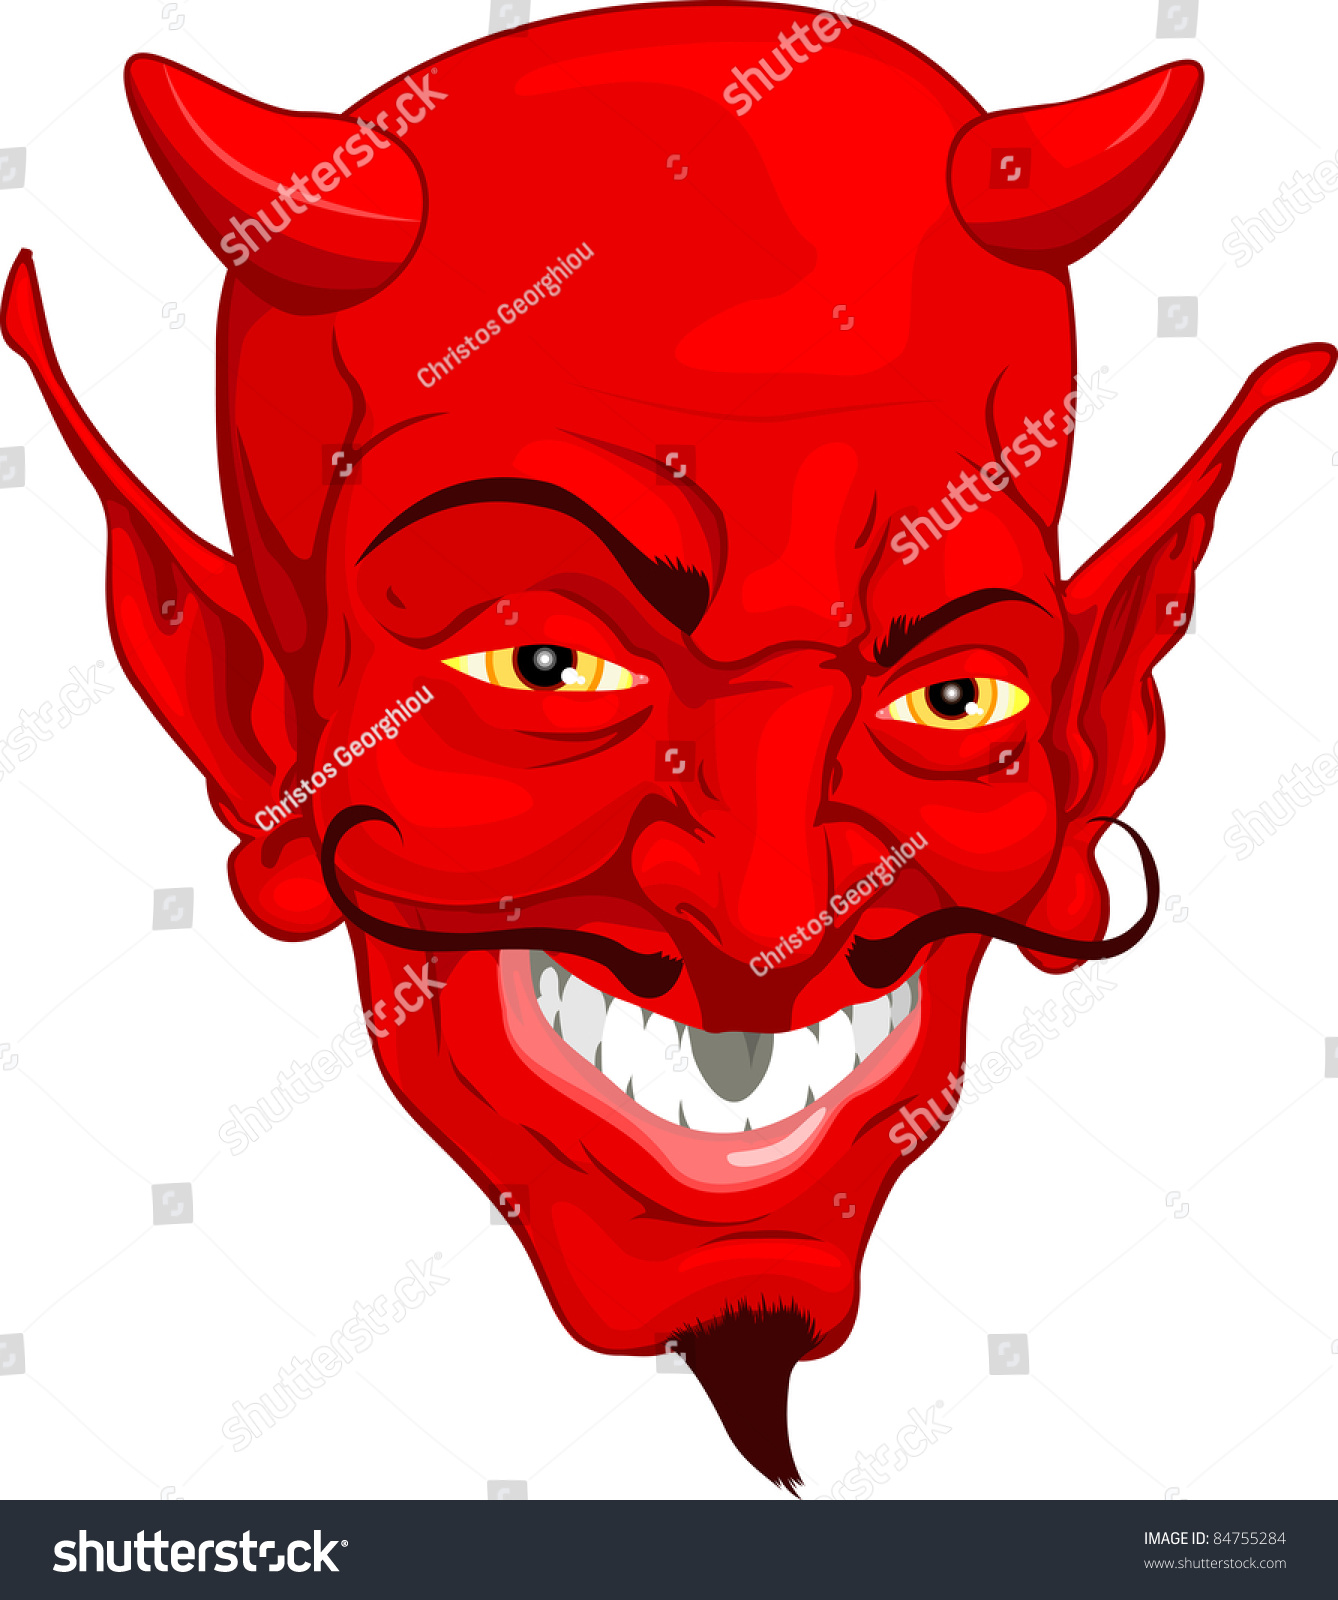 A Red Cartoon Style Devil Face Stock Photo 84755284 : Shutterstock